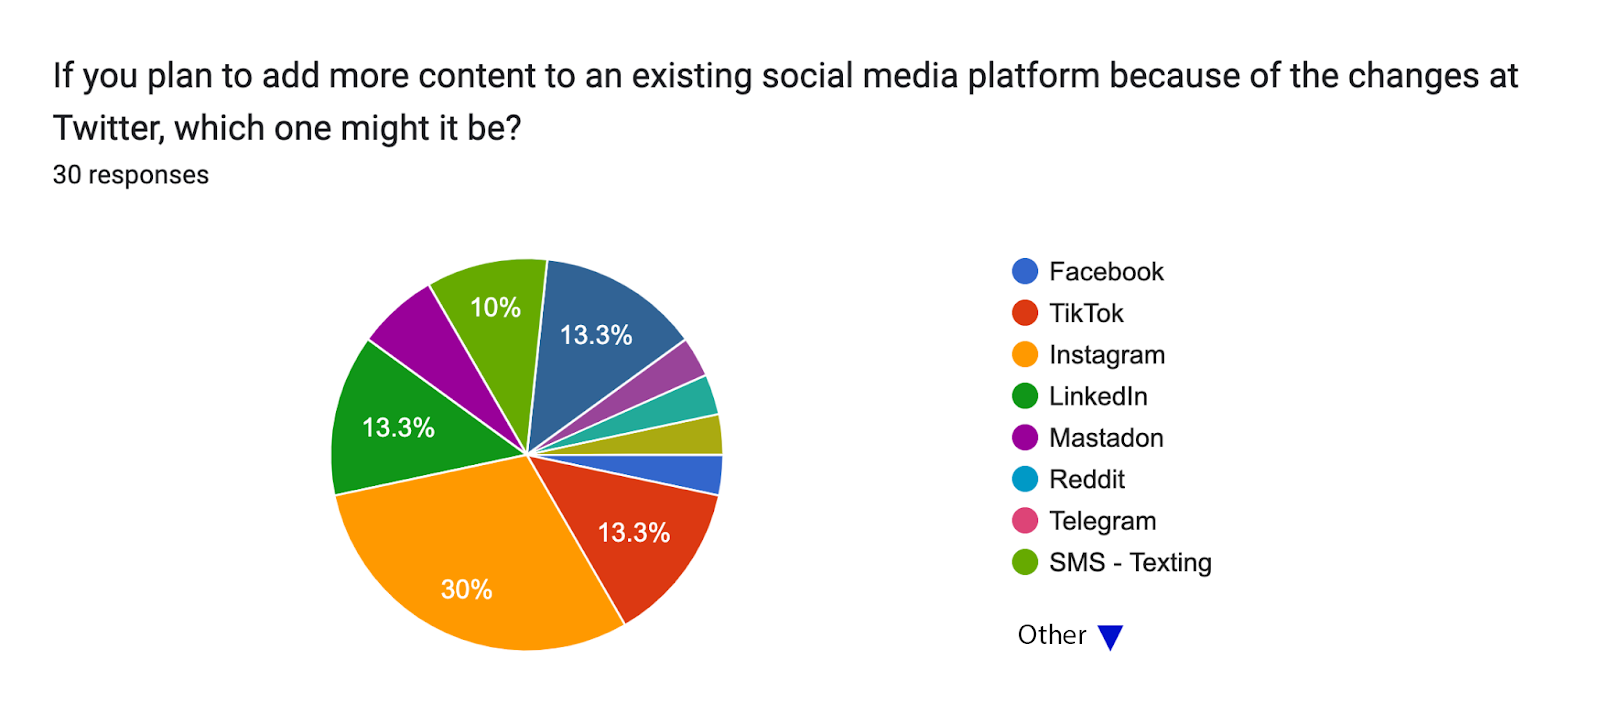 A pie chart showing the results of a survey that asks, "If you plan to add more content to an existing social media platform because of the changes at Twitter, which one might it be?" The most common response is Instagram at 30%. 